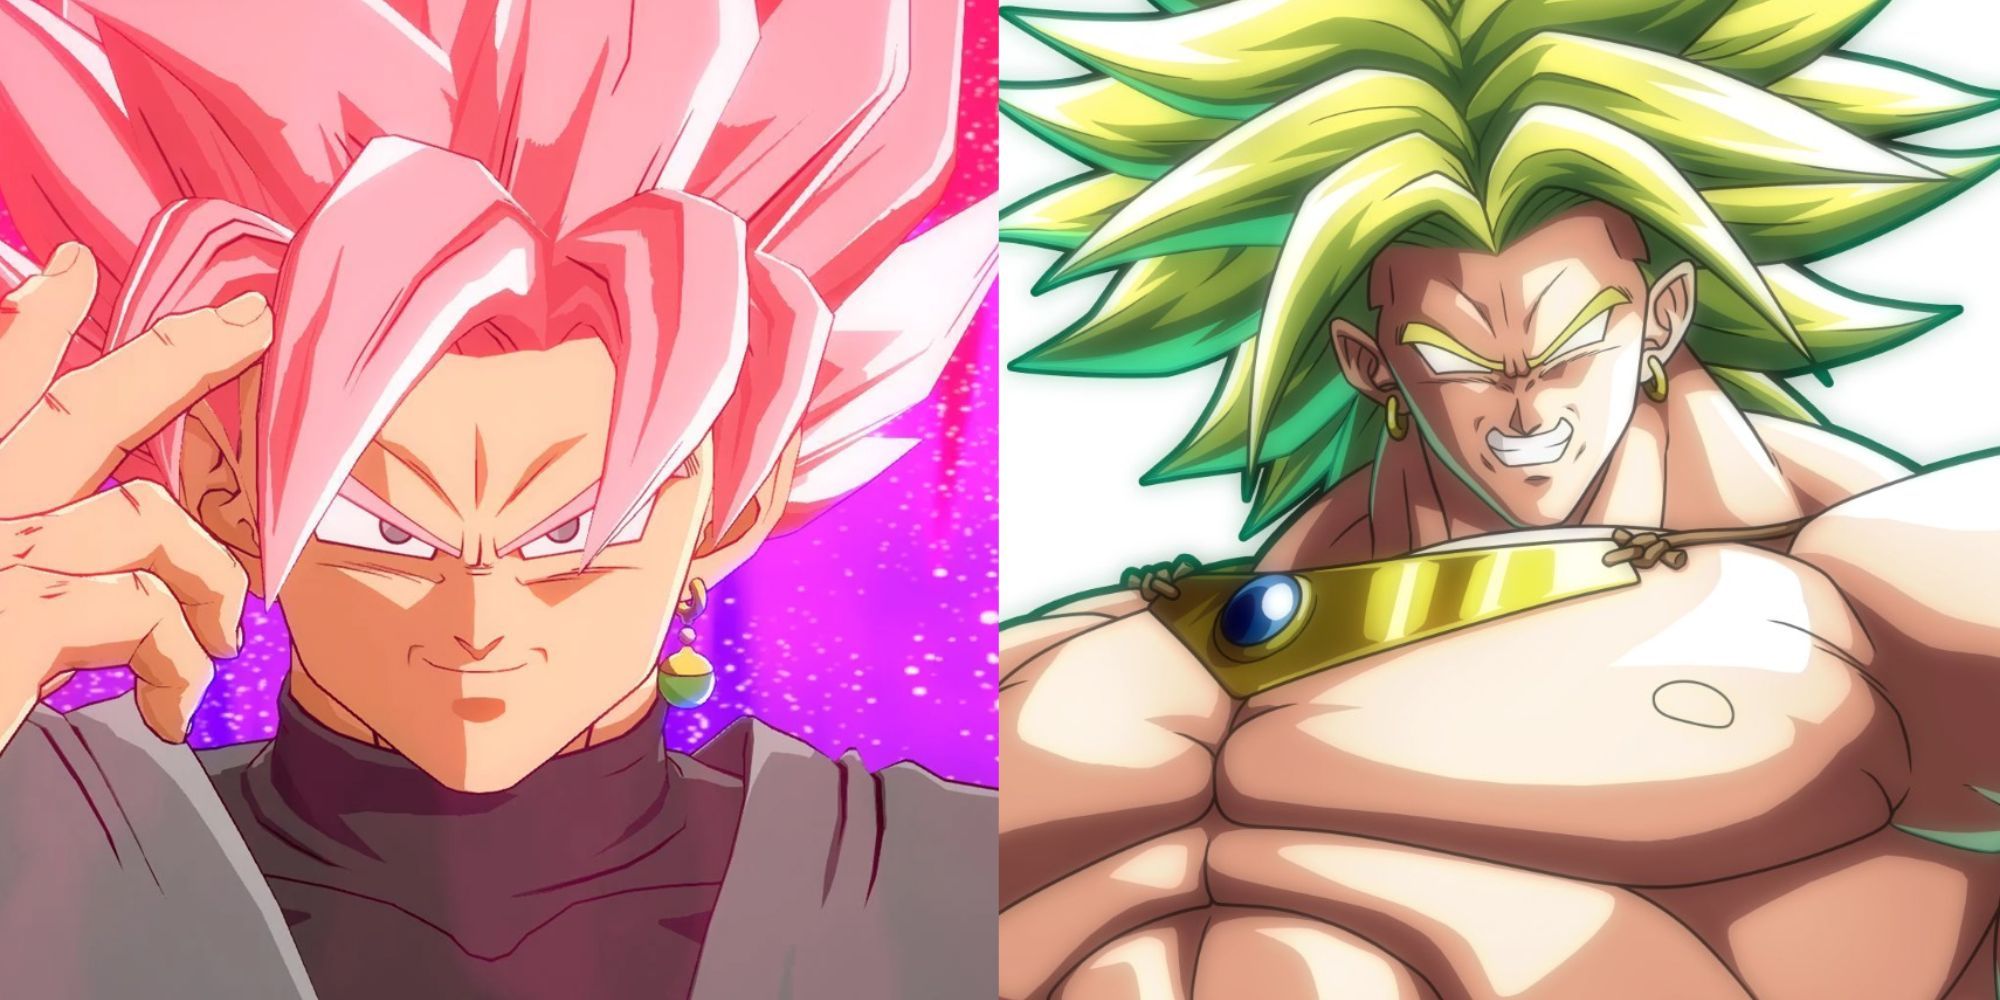 gogeta ssj5, the all mighty sayens had fused and unleashed …